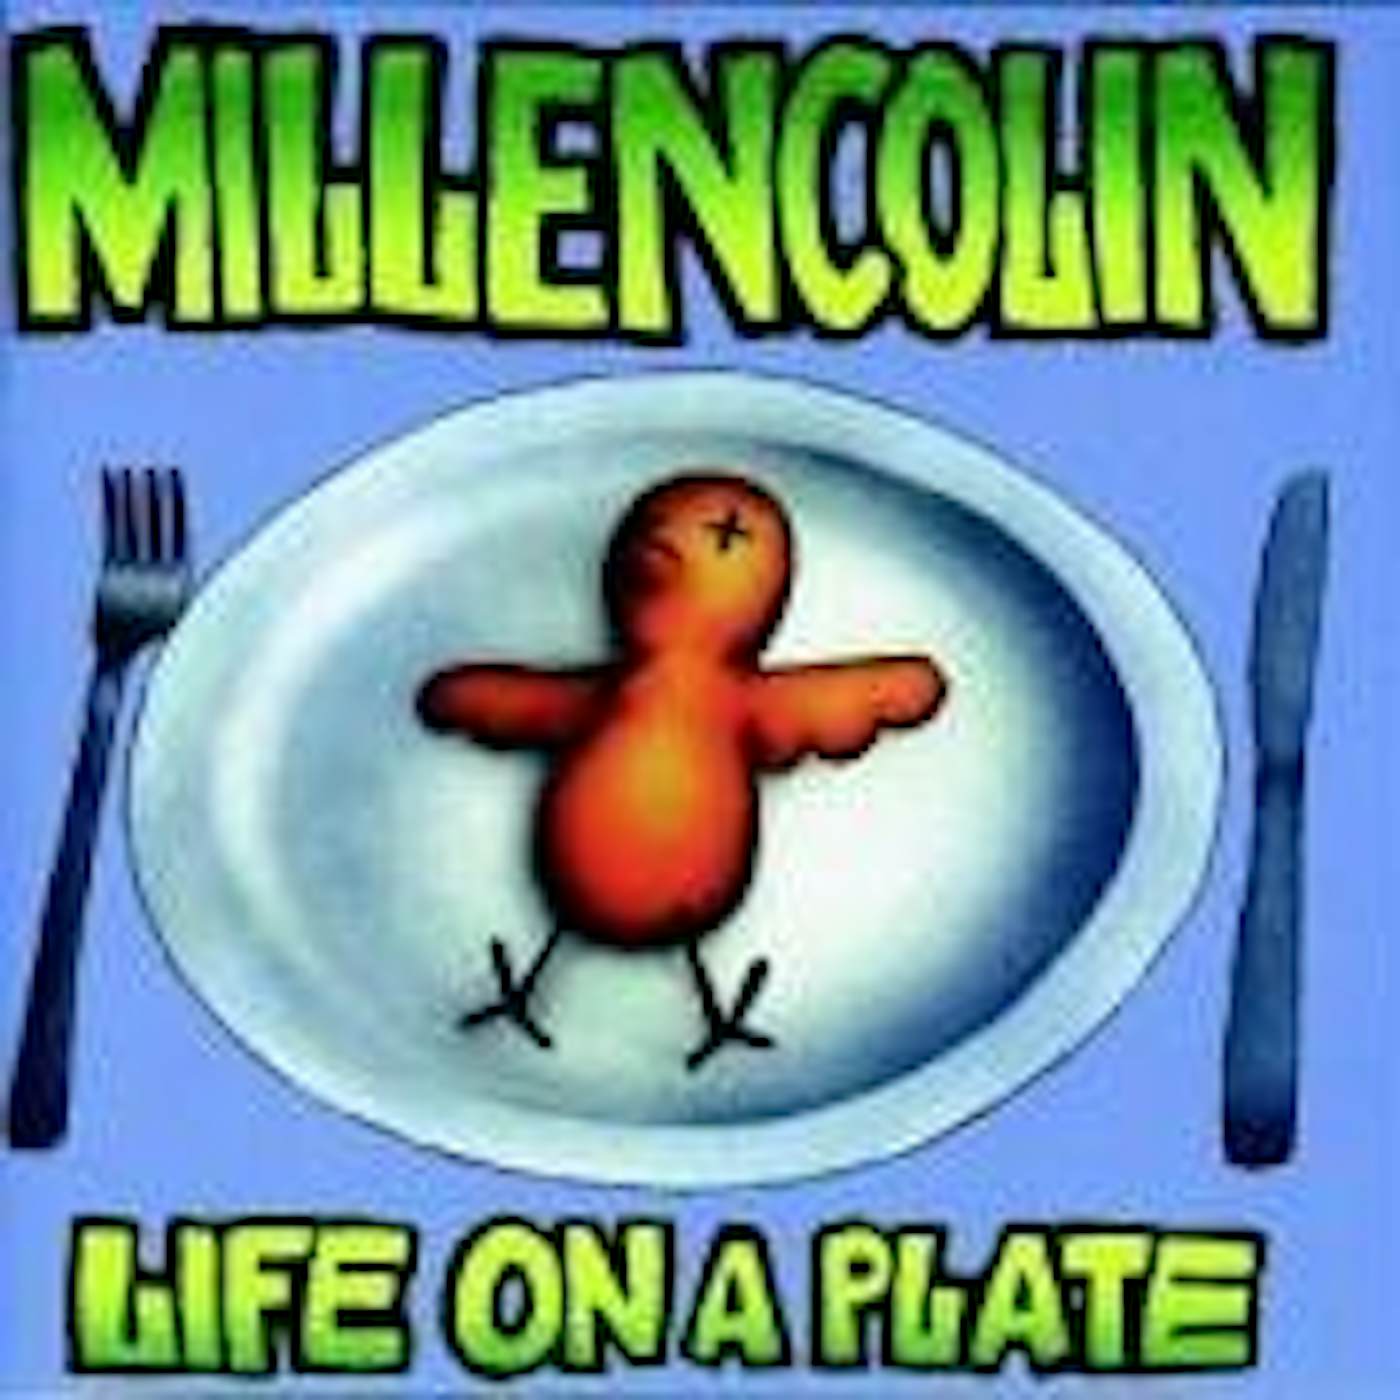 Millencolin LIFE ON A PLATE CD